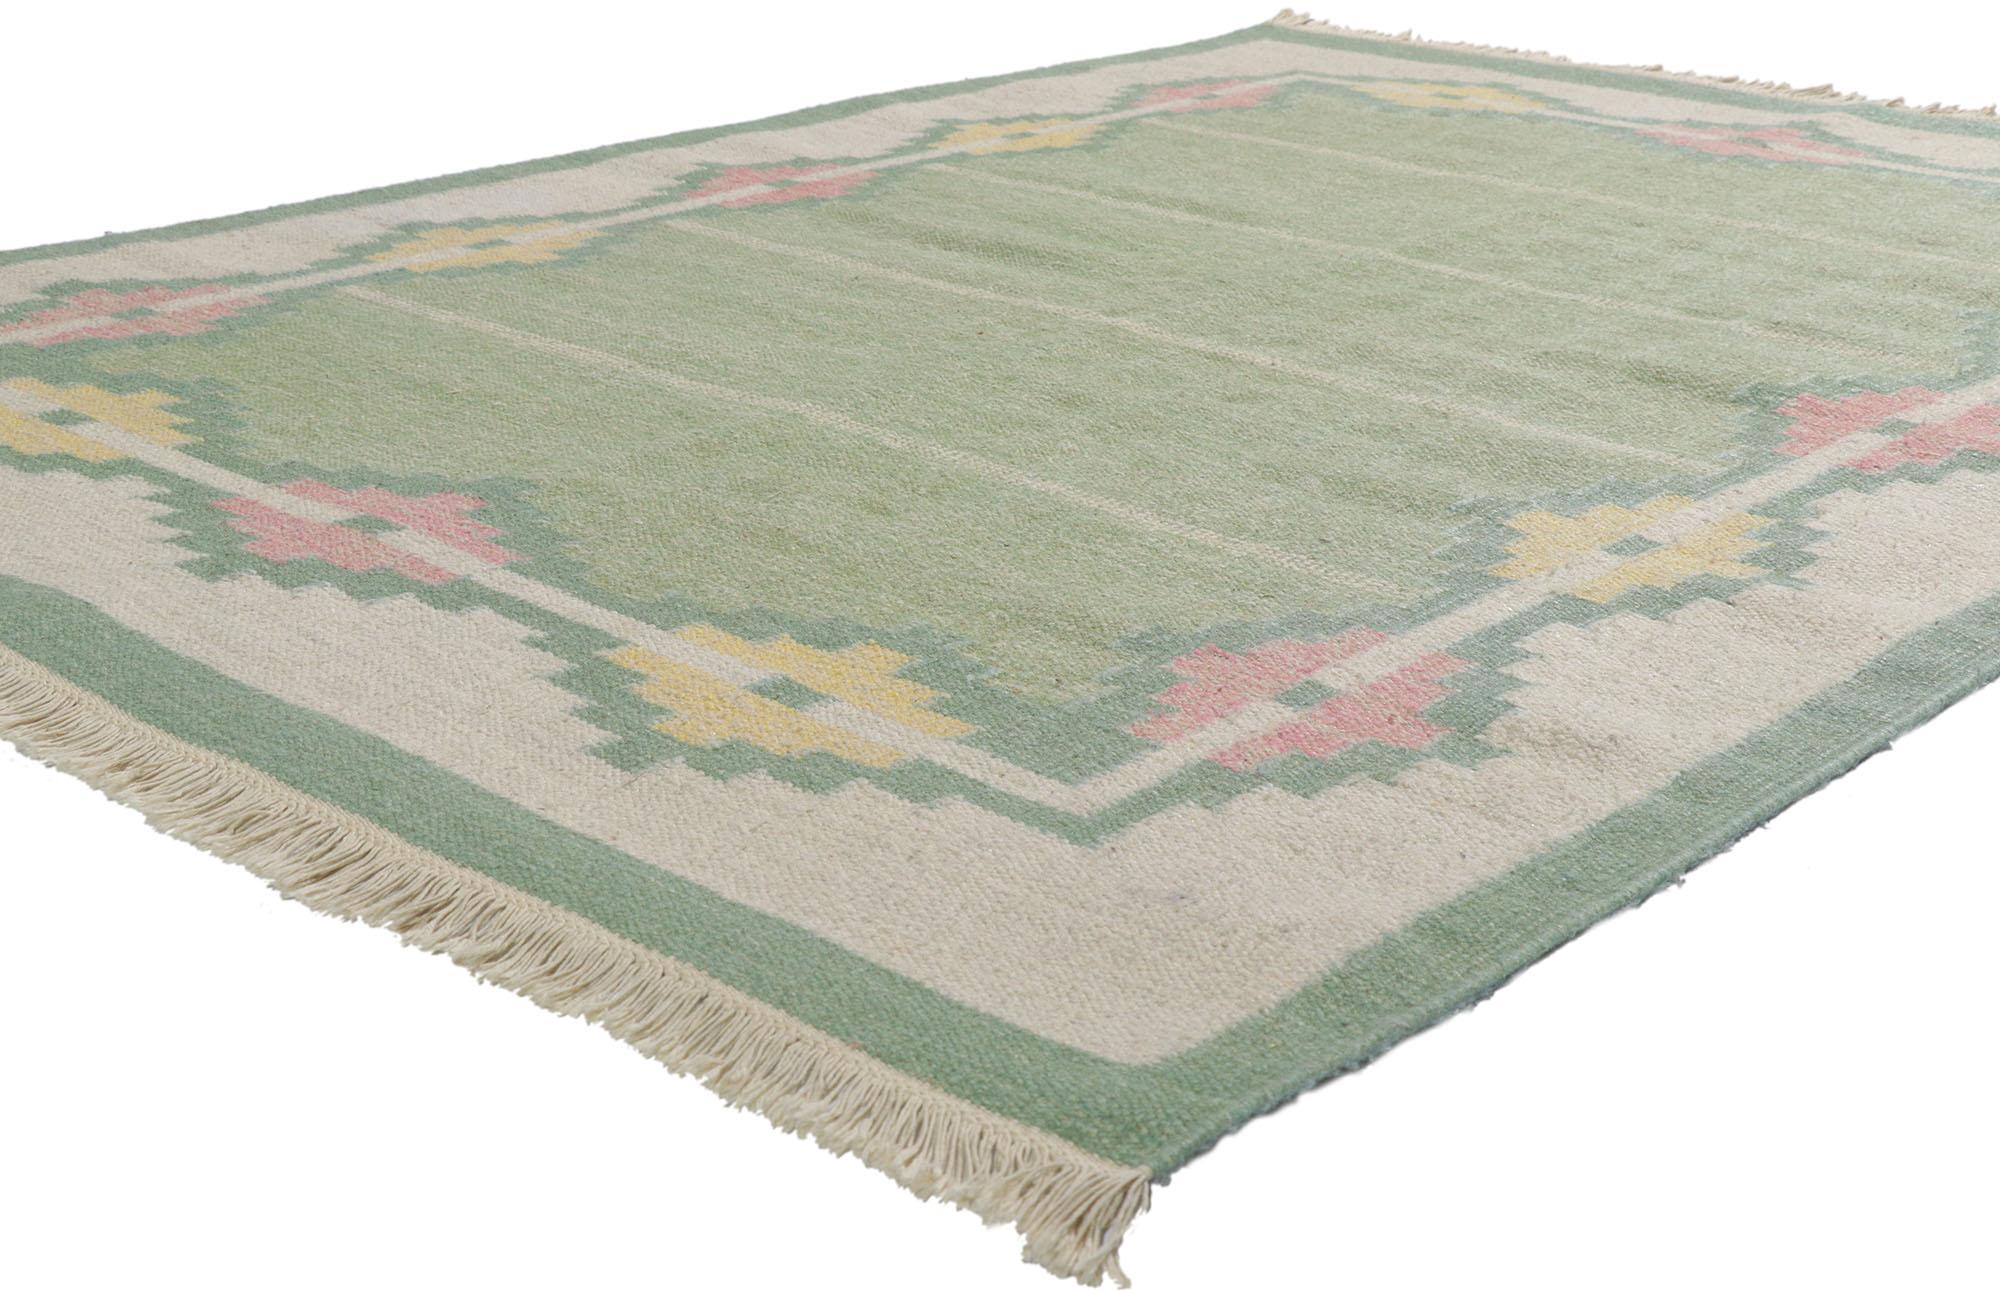 78263 Vintage Swedish Rollakan rug with Scandinavian Modern Style 05'06 x 07'06. With its geometric design and bohemian hygge vibes, this hand-woven wool Swedish Kilim rug beautifully embodies the simplicity of Scandinavian modern style. Showcasing